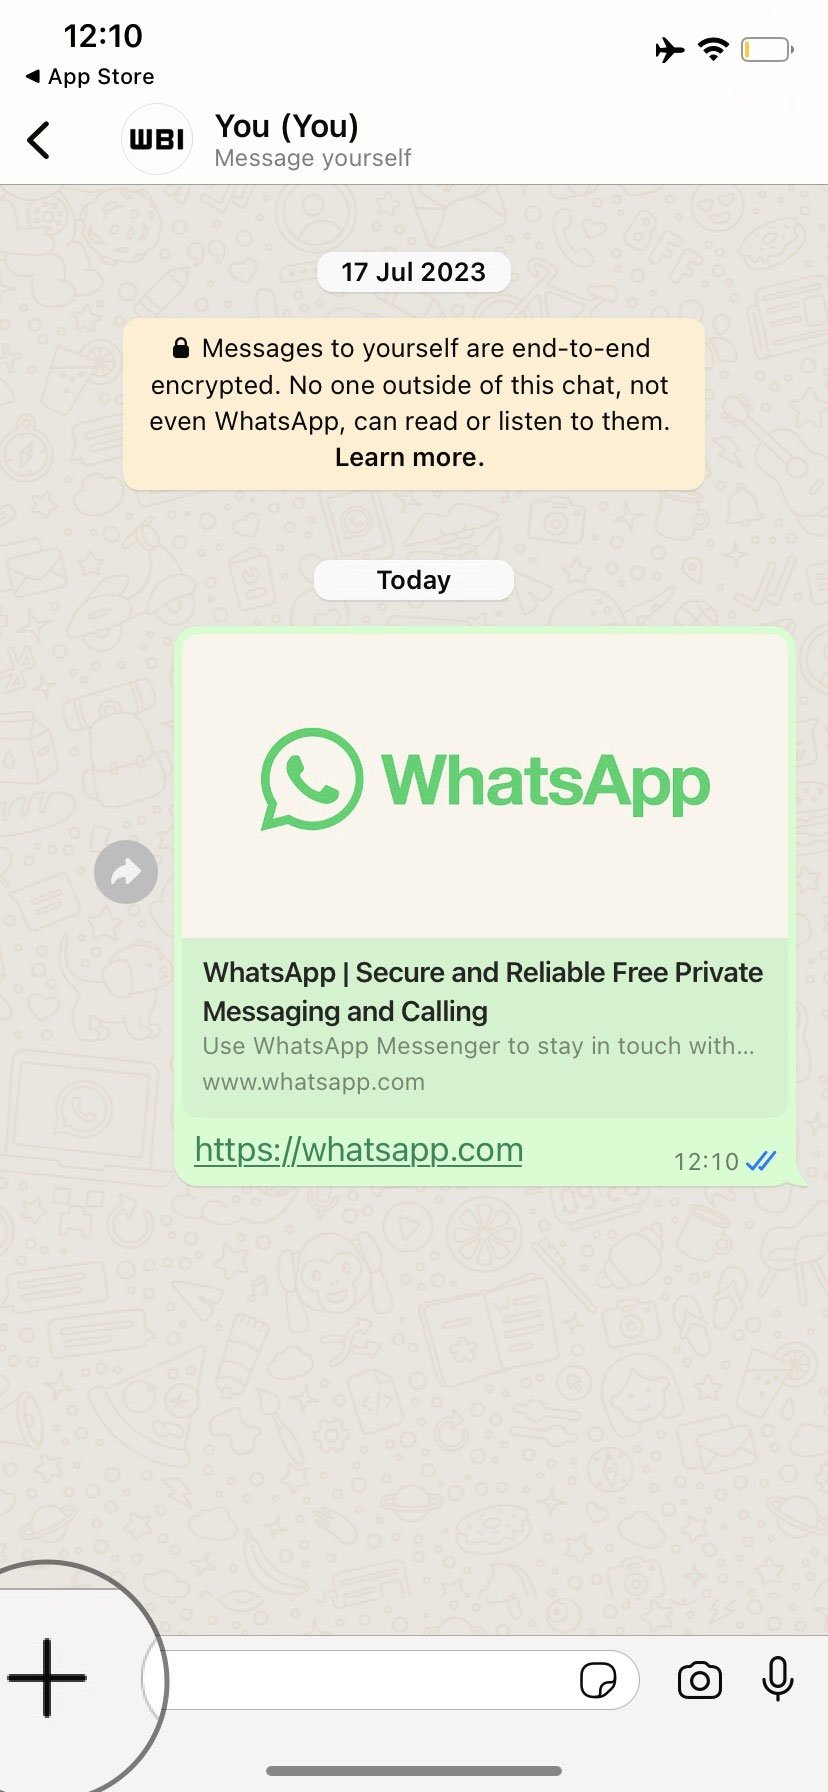 WhatsApp introduced photo library shortcut for faster sharing